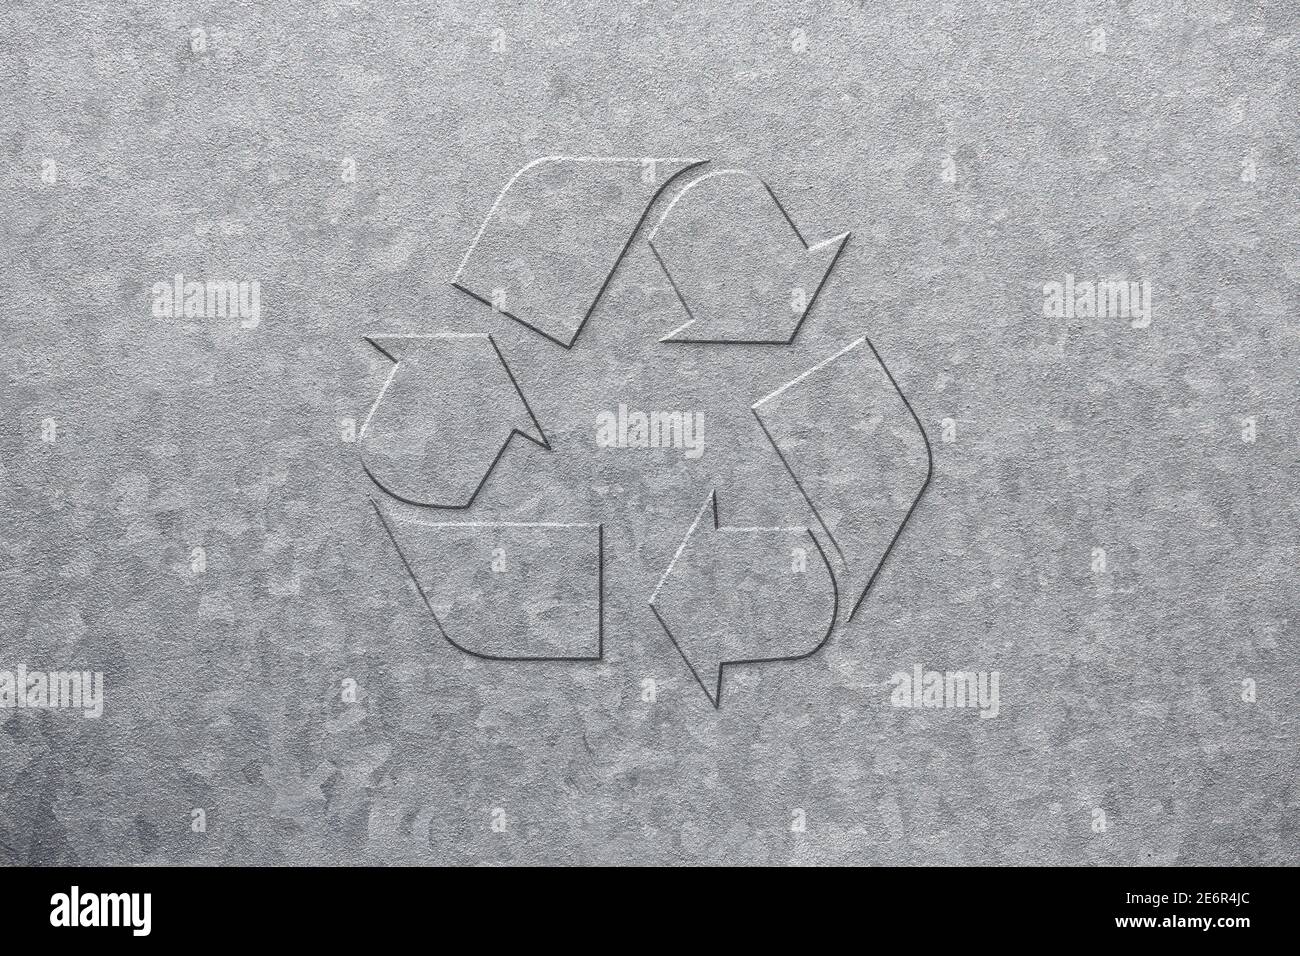 Universal logo of recyclable materials embossed on a galvanized steel plate. Stock Photo